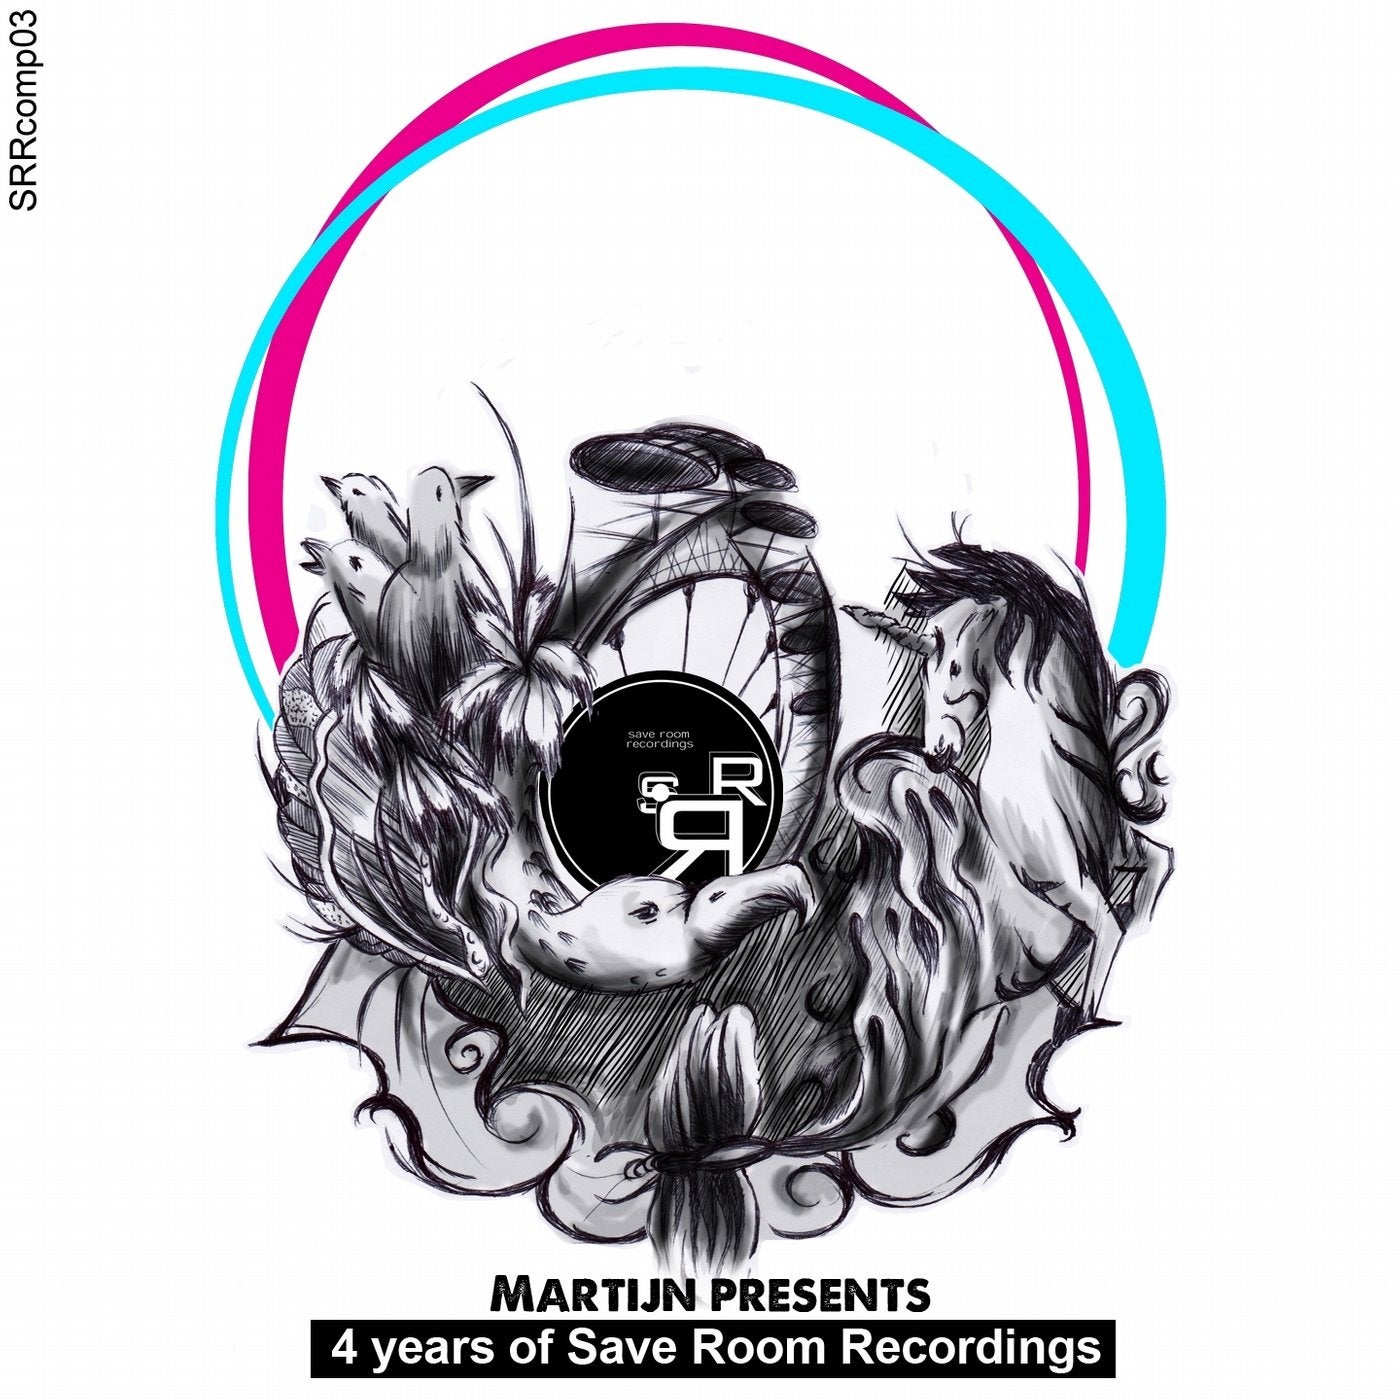 Martijn Presents 4 Years of Save Room Recordings